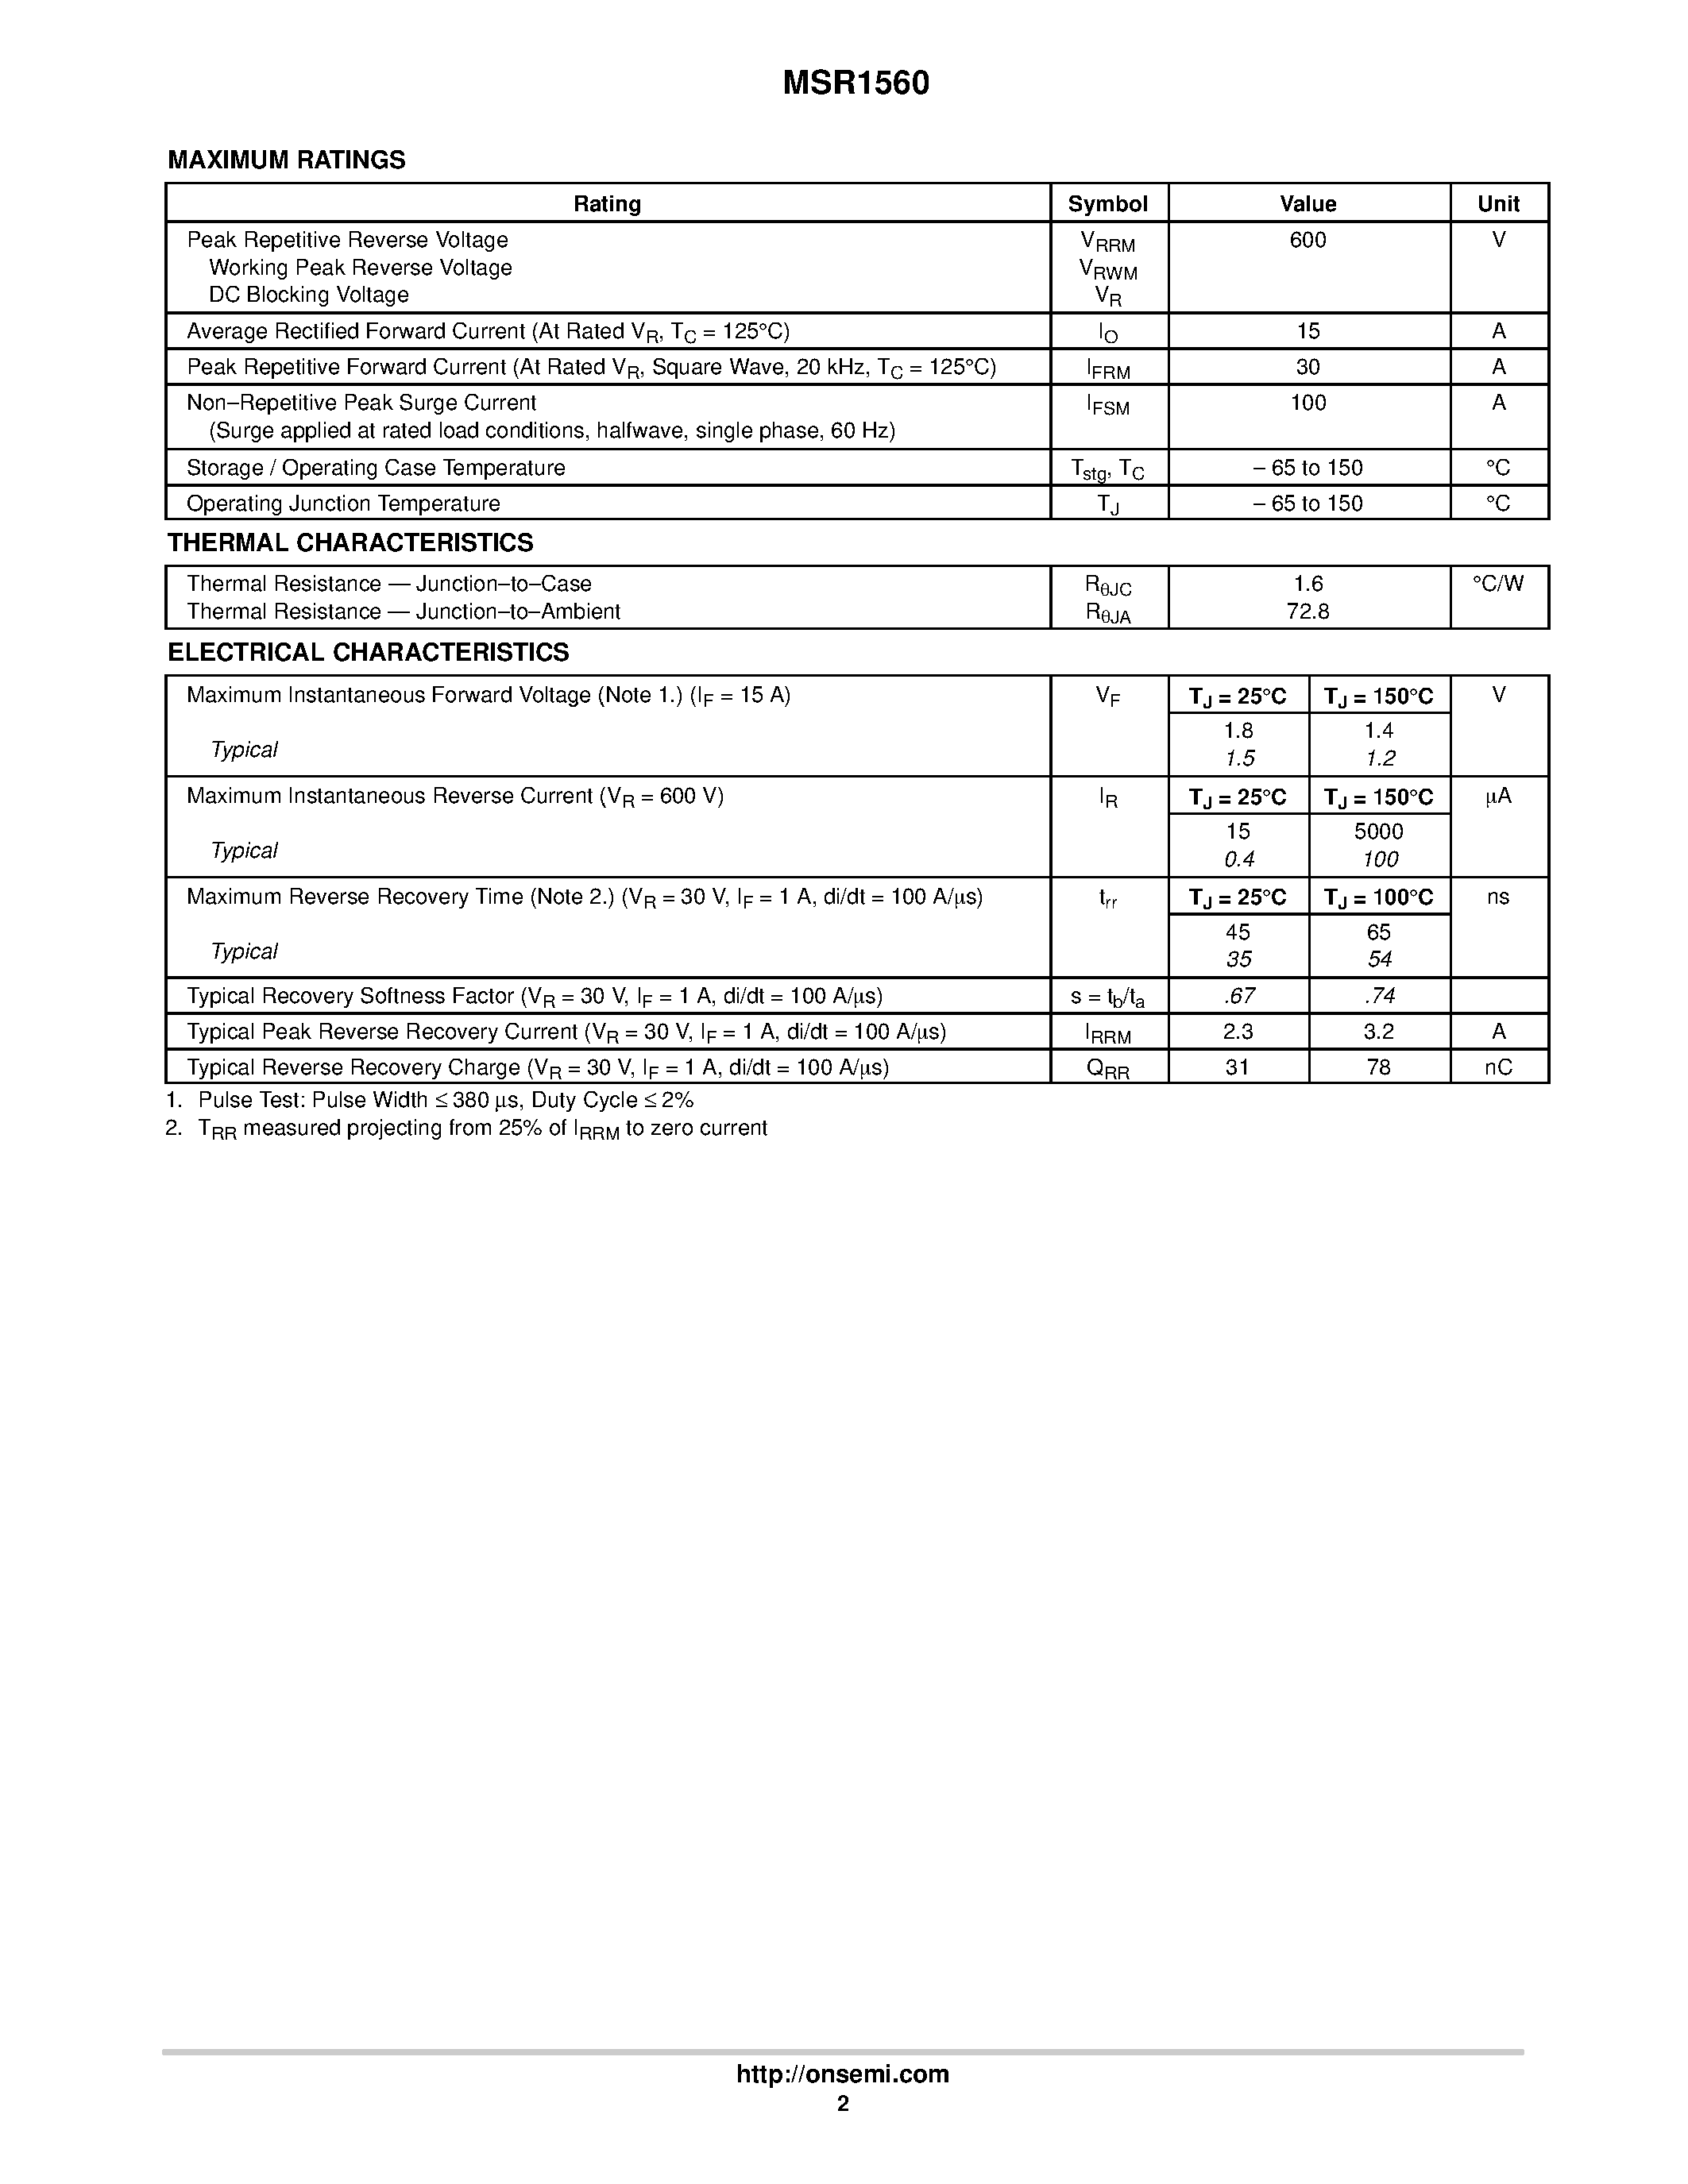 Datasheet MSR1560 - SWITCHMODE Soft Recovery Power Rectifier page 2